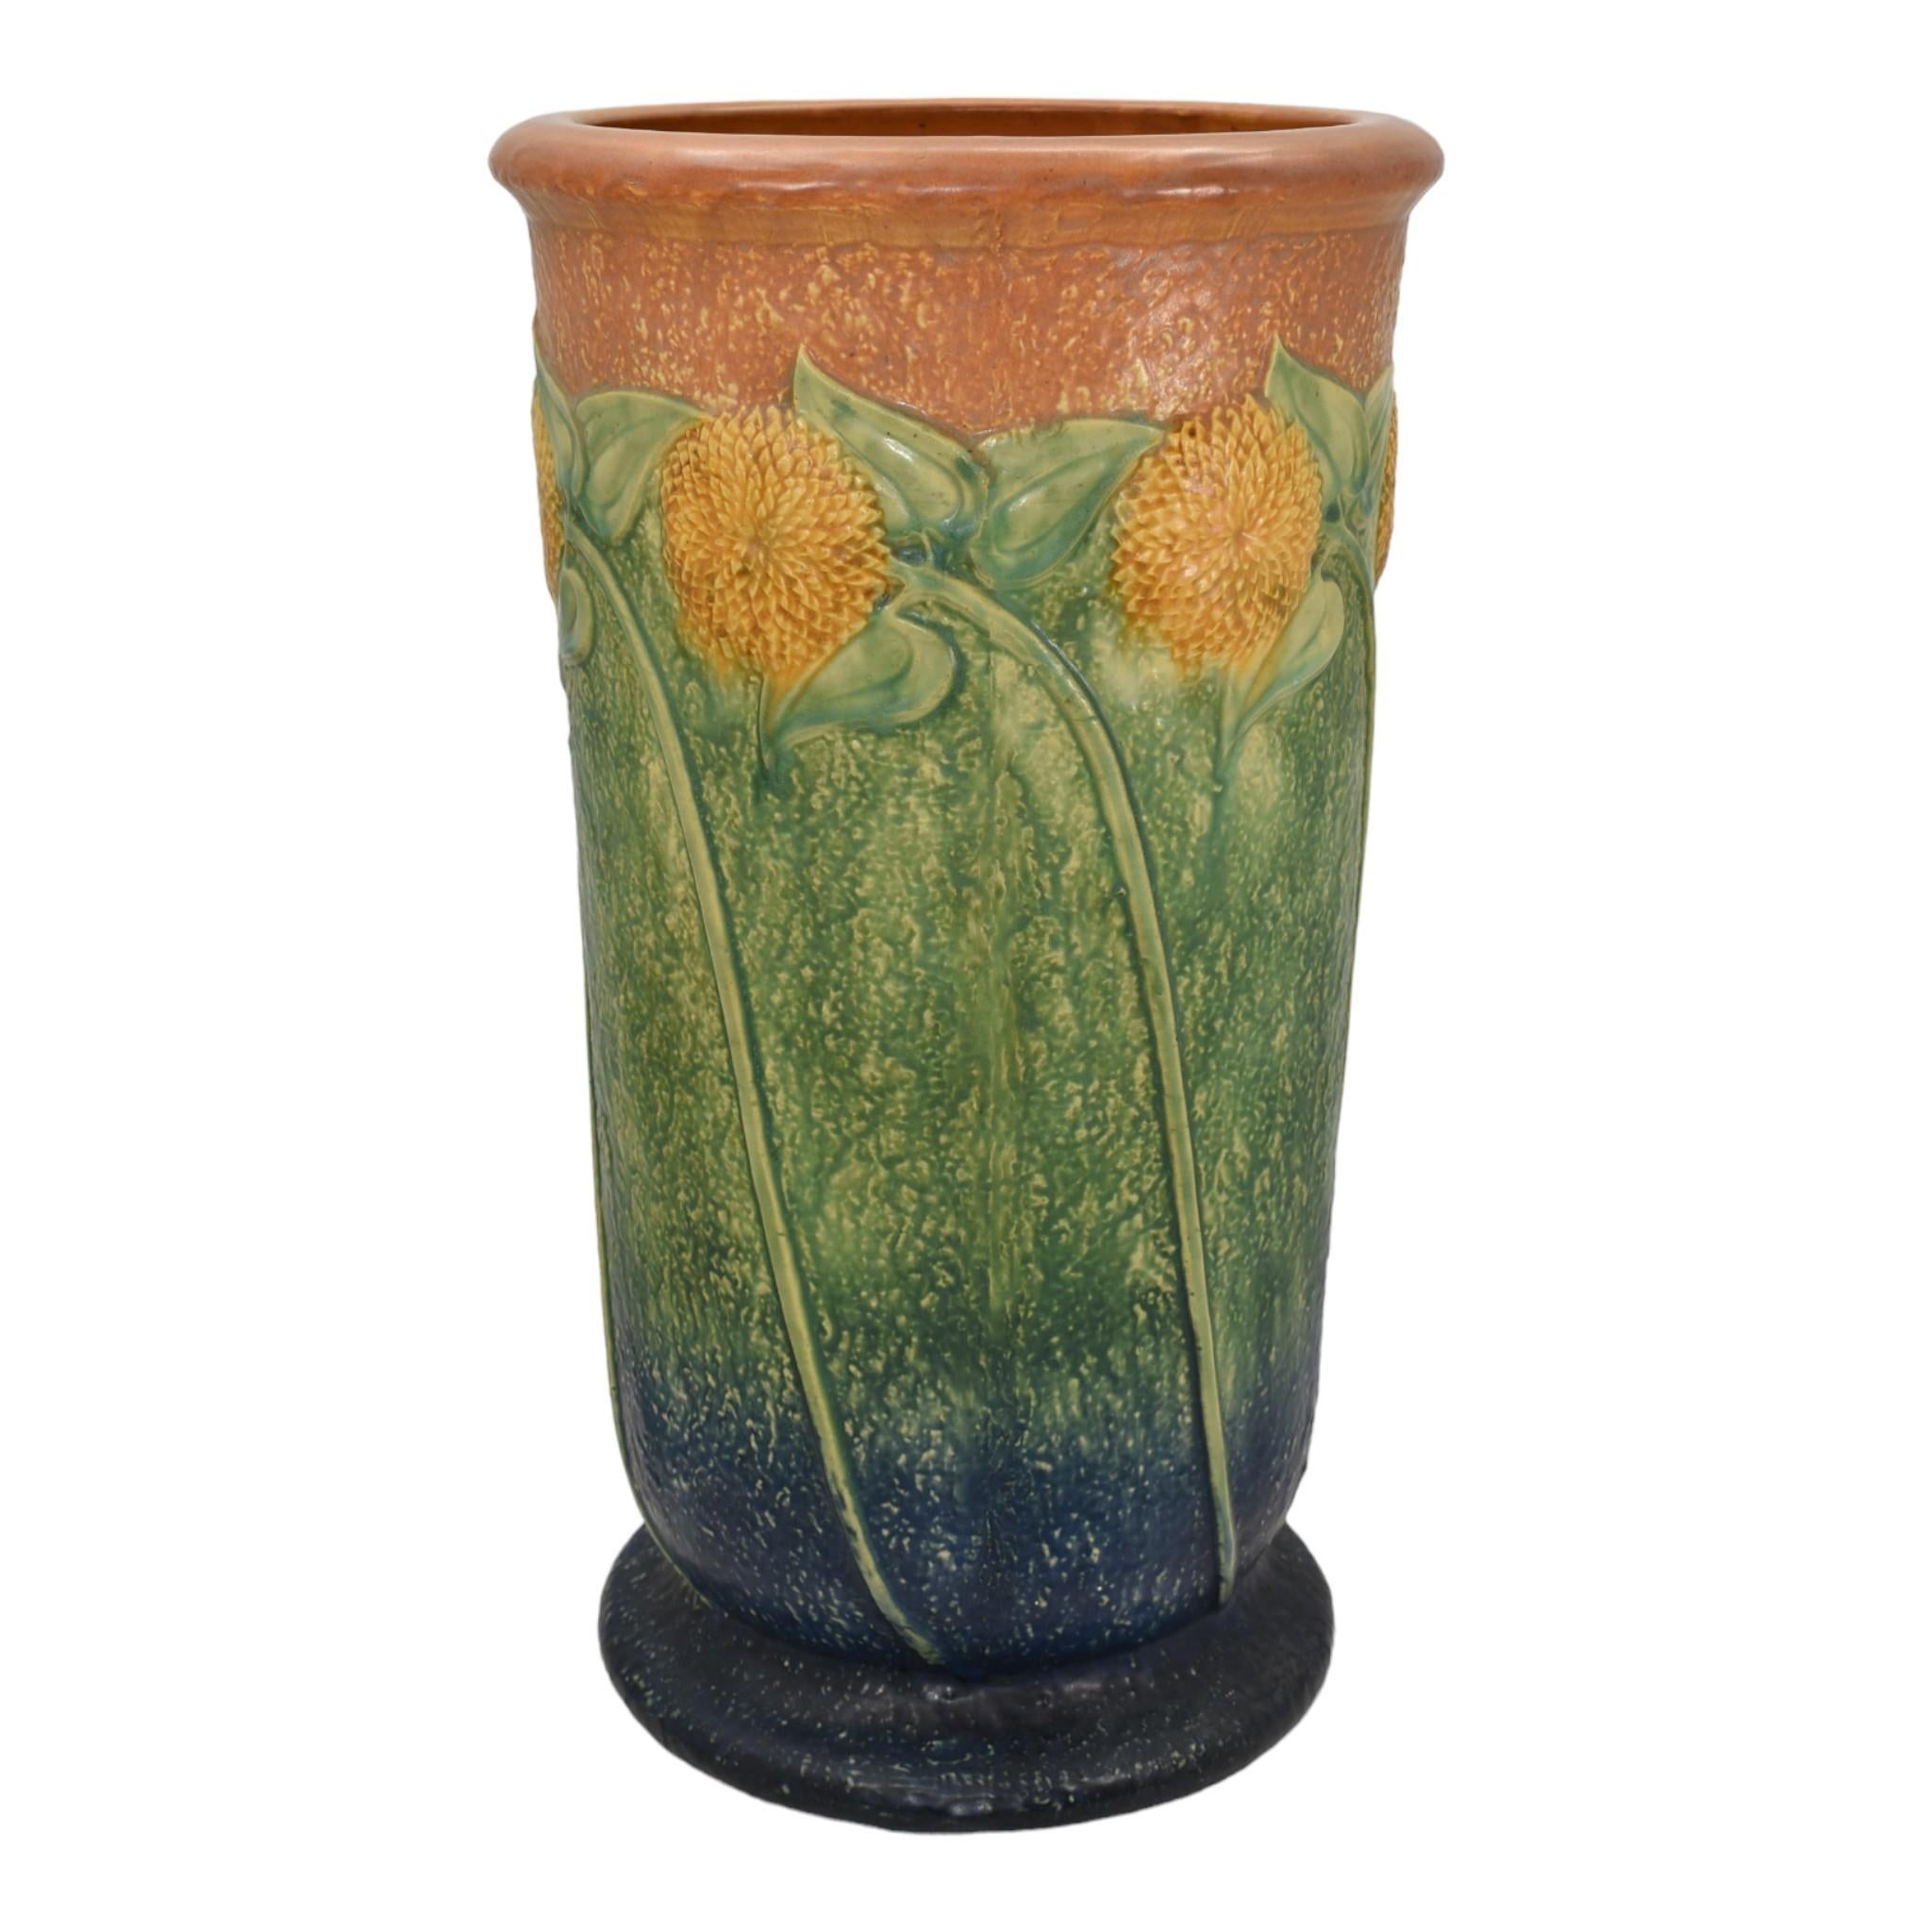 Roseville Sunflower 1930 Vintage Arts And Crafts Ceramic Umbrella Stand 770-20
Superior mold with great color. 
Excellent original condition. No chips, cracks, damage or repair of any kind. Minor factory glaze skip near the base. 
Bottom marked with